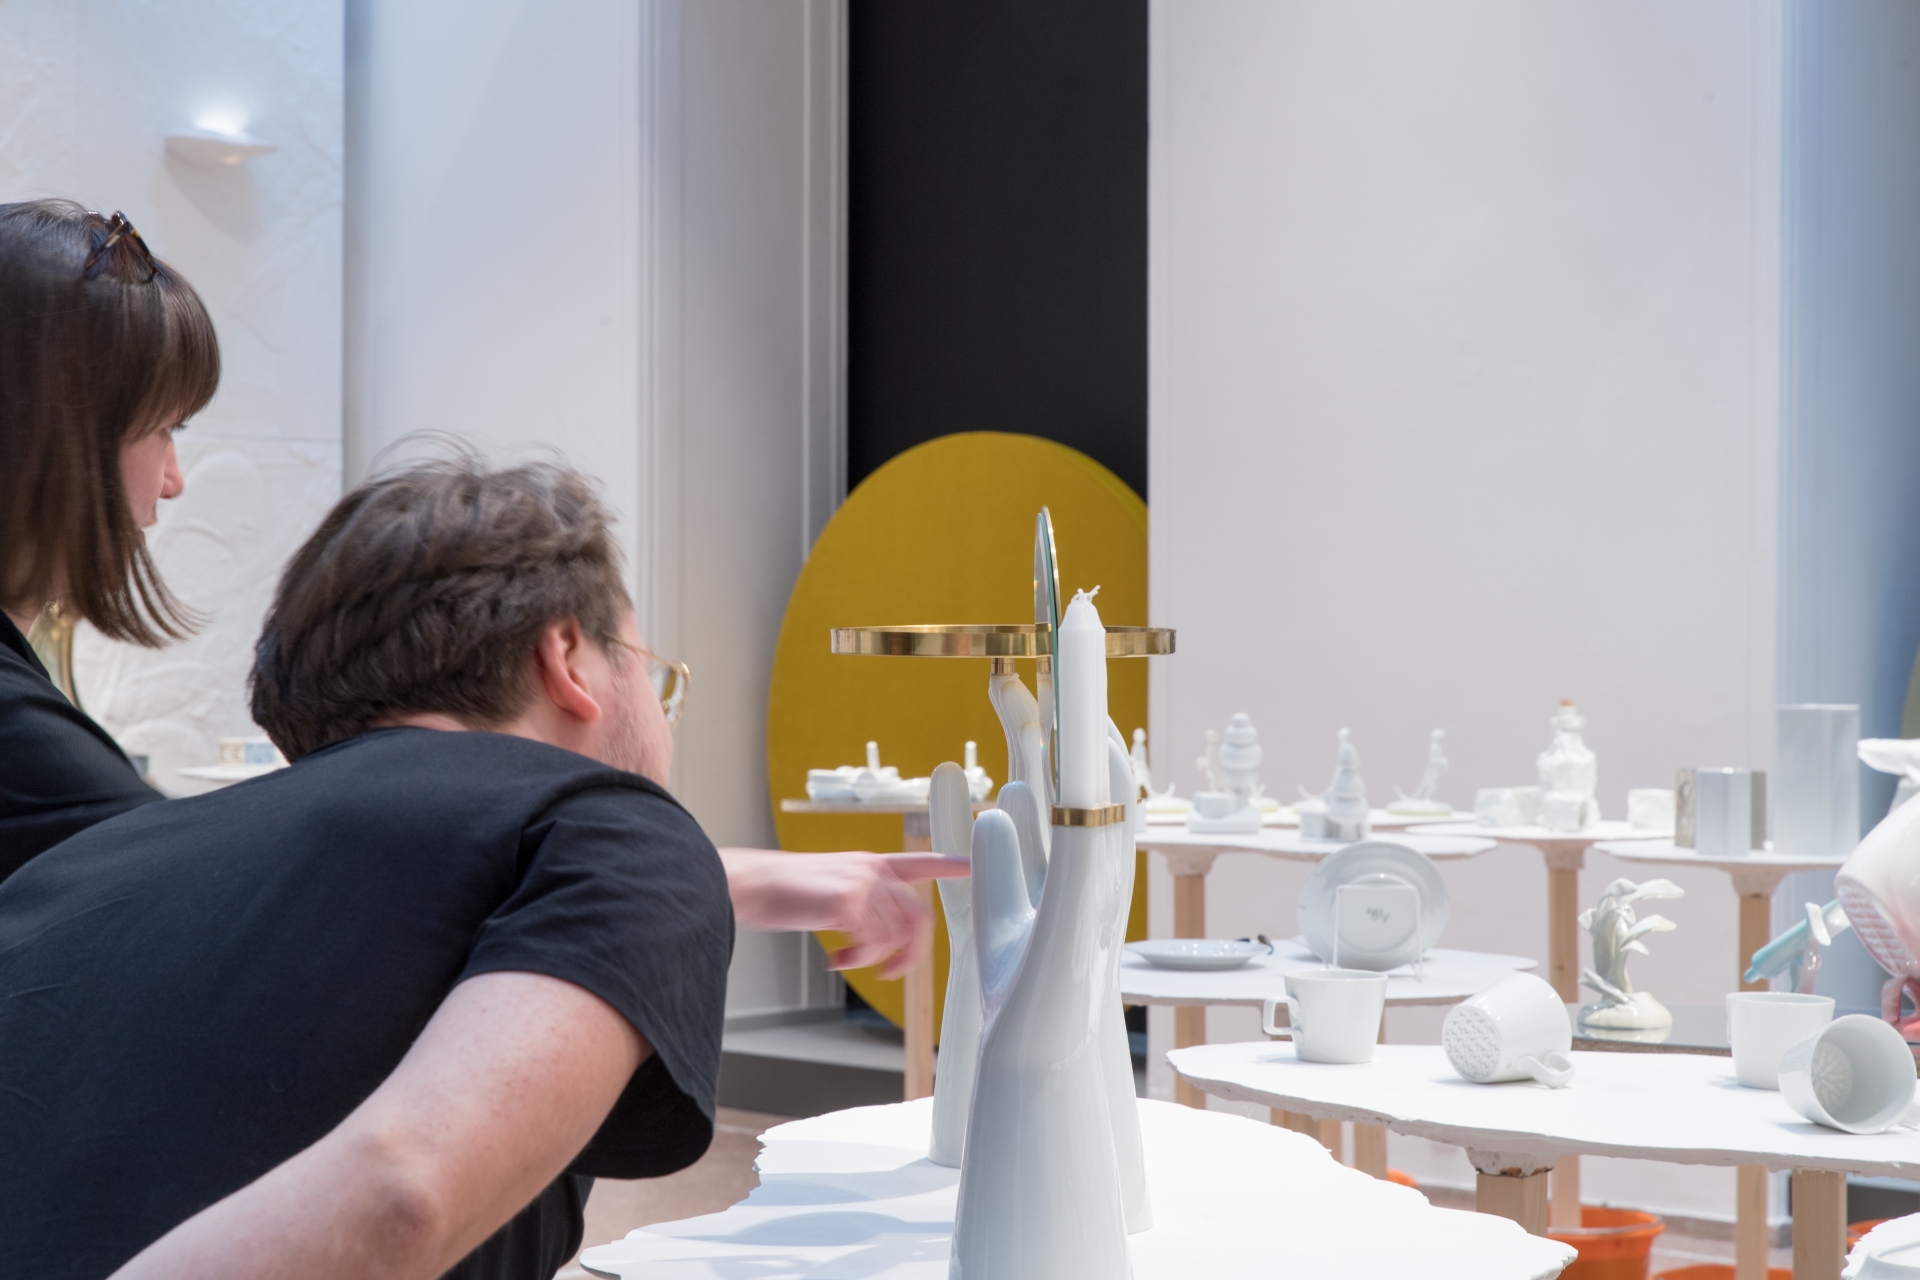 The exhibition Terra Alba – the New Wave of Czech Porcelain continues in the Museum of Decorative Arts in Brno